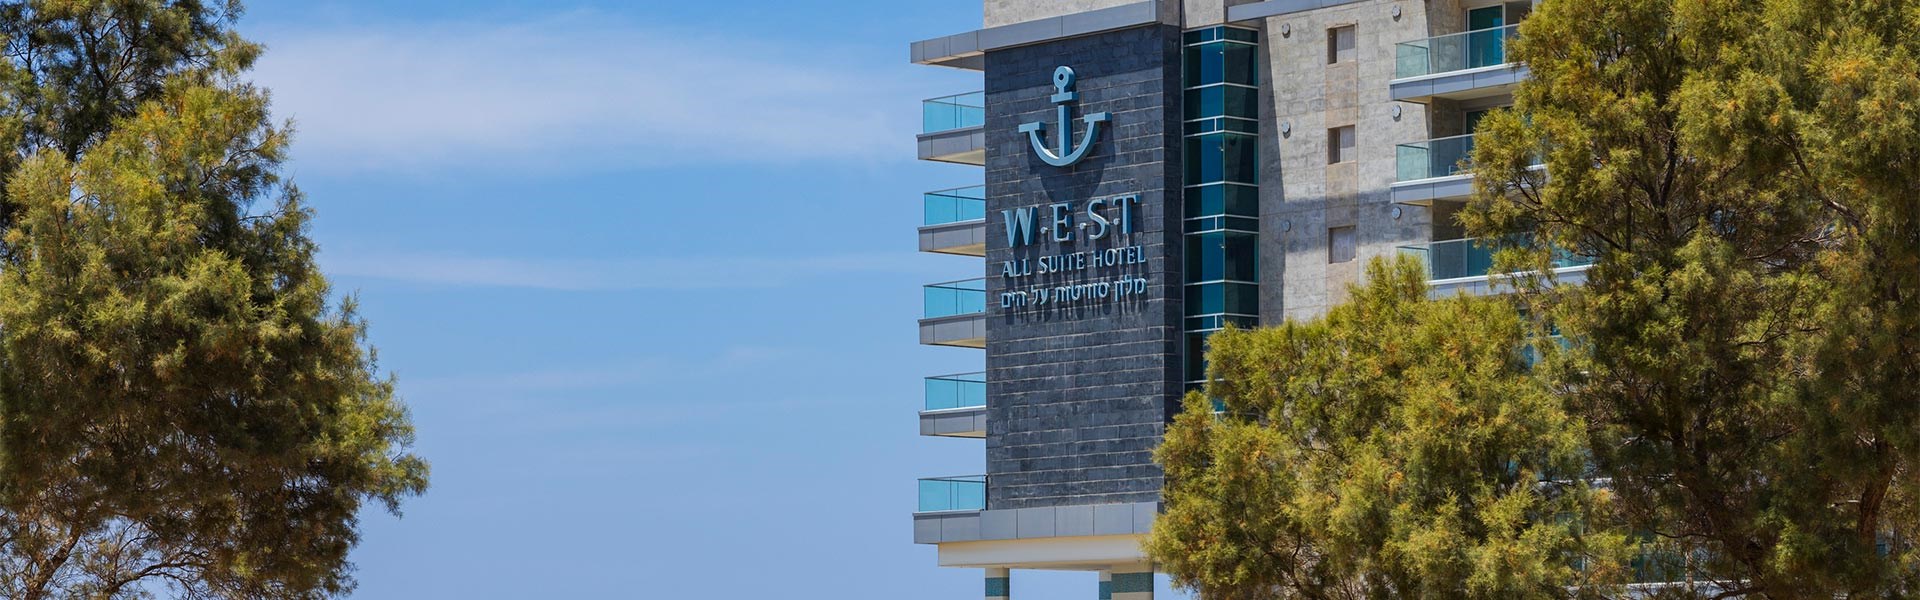 Attractions in Ashdod - West All Suite Boutique As